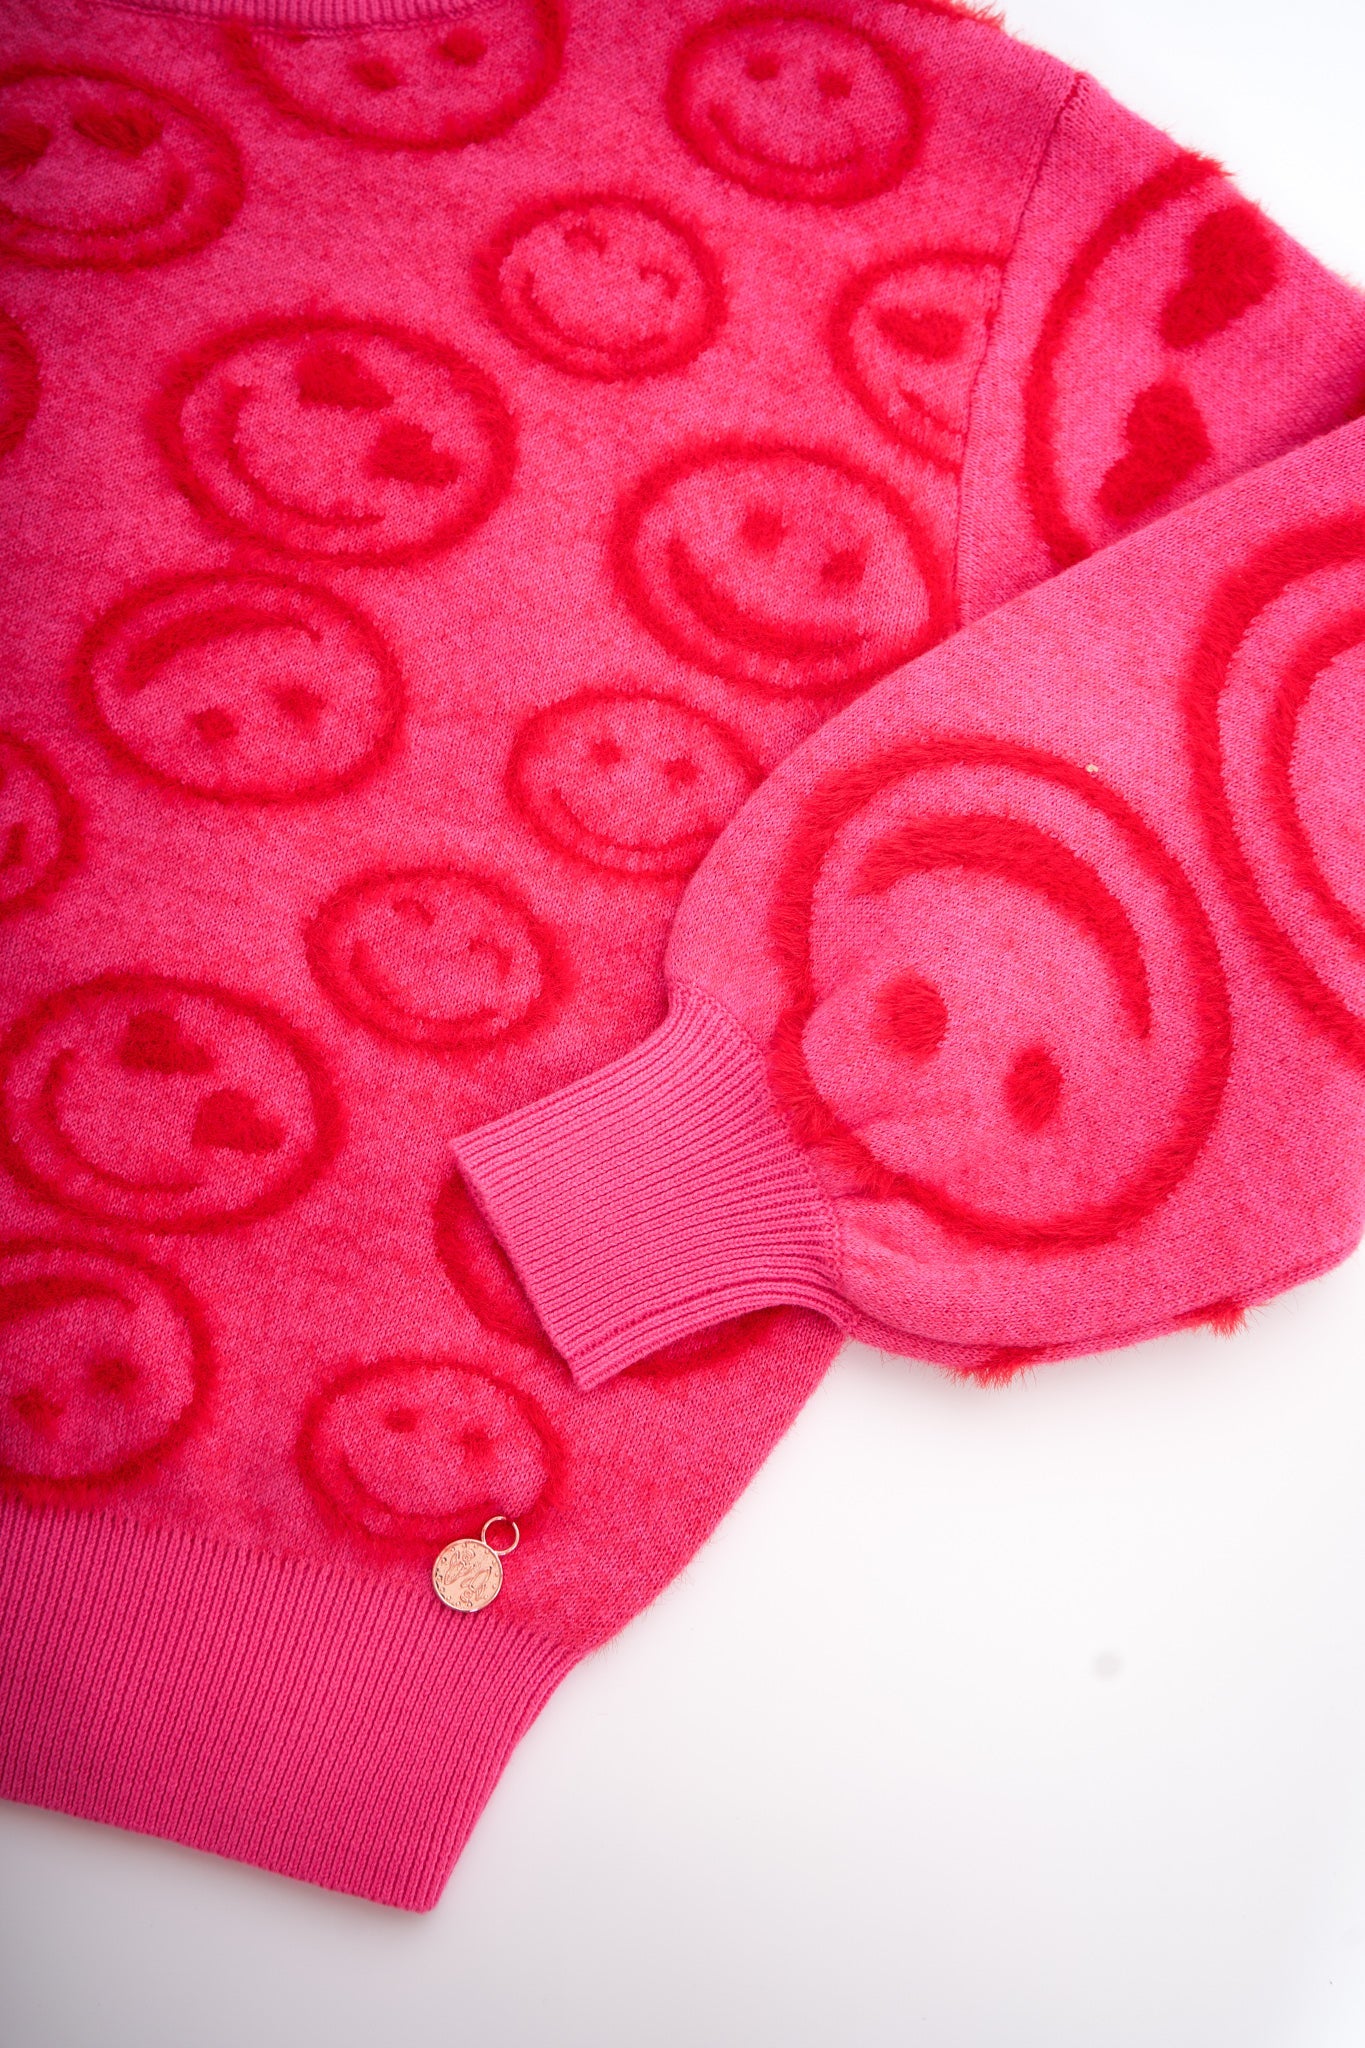 Girls Smiley Face Printed Pink Sweater